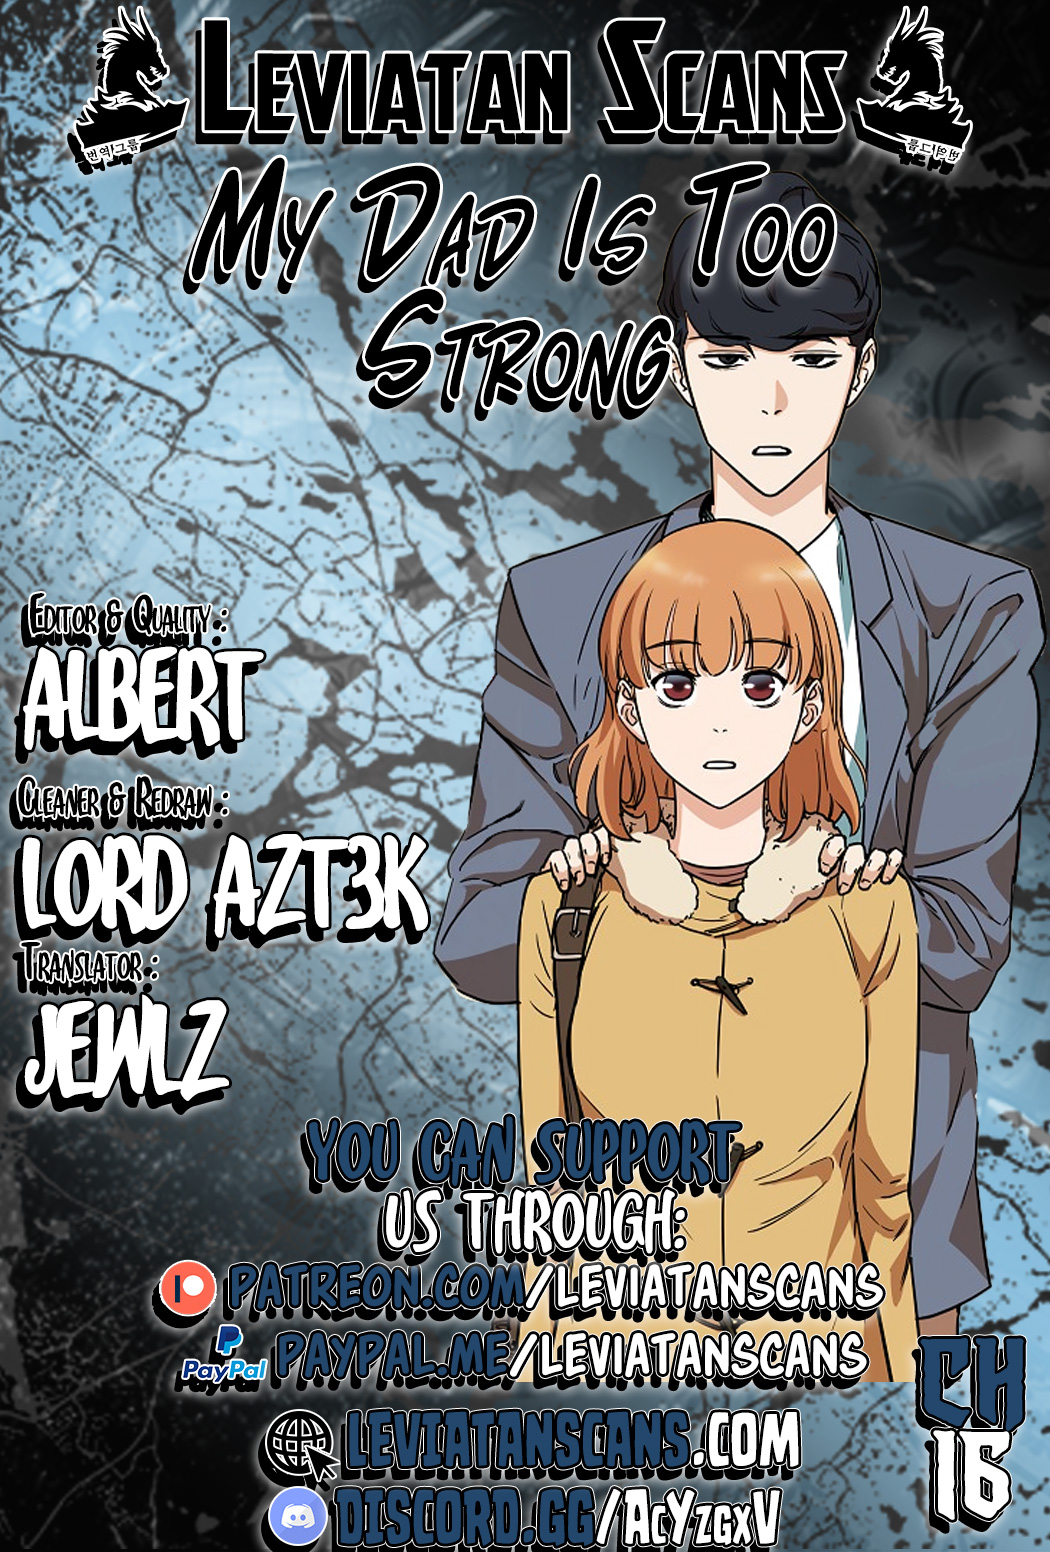 My Dad is Too Strong - Chapter 2595 - Image 1